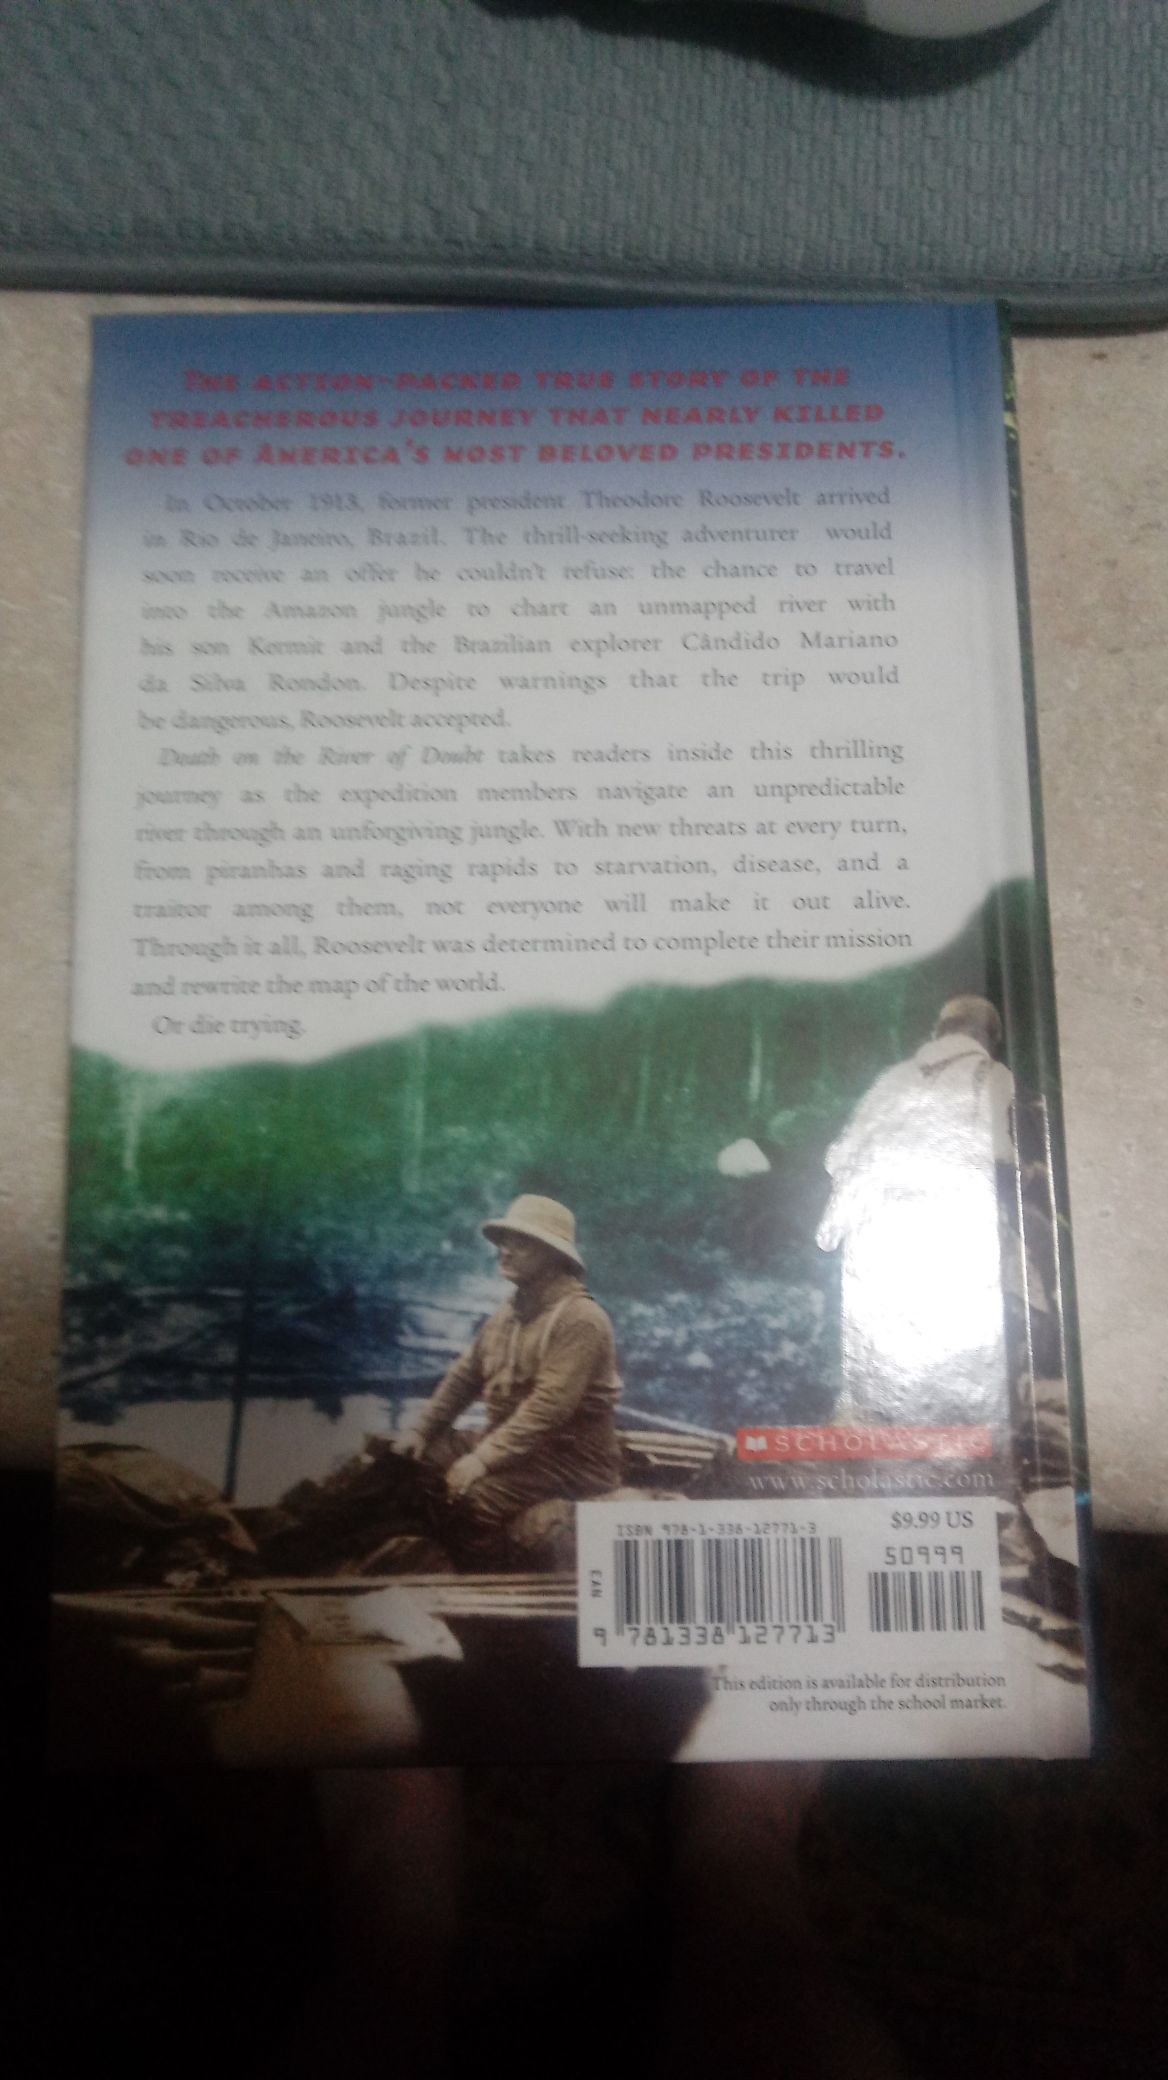 death on the River of Doubt Theodore Roosevelt’s Amazing Adventure - Samantha Seiple book collectible [Barcode 9781338127713] - Main Image 2